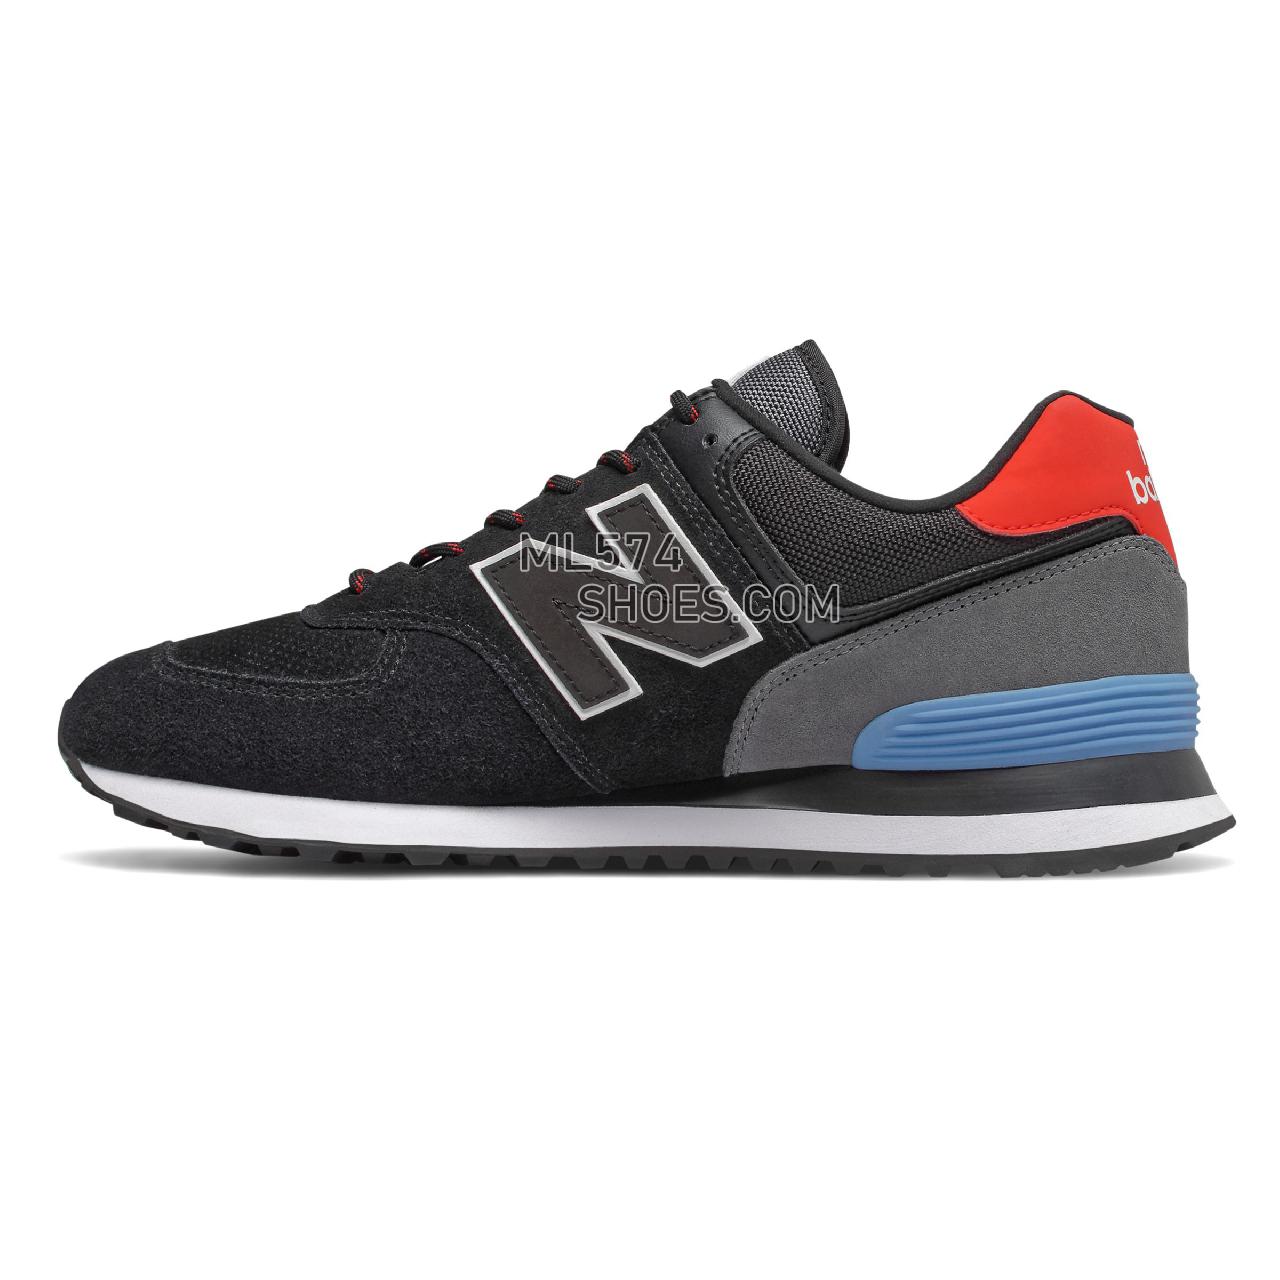 New Balance 574 - Men's Classic Sneakers - Black with Velocity Red - ML574JHO